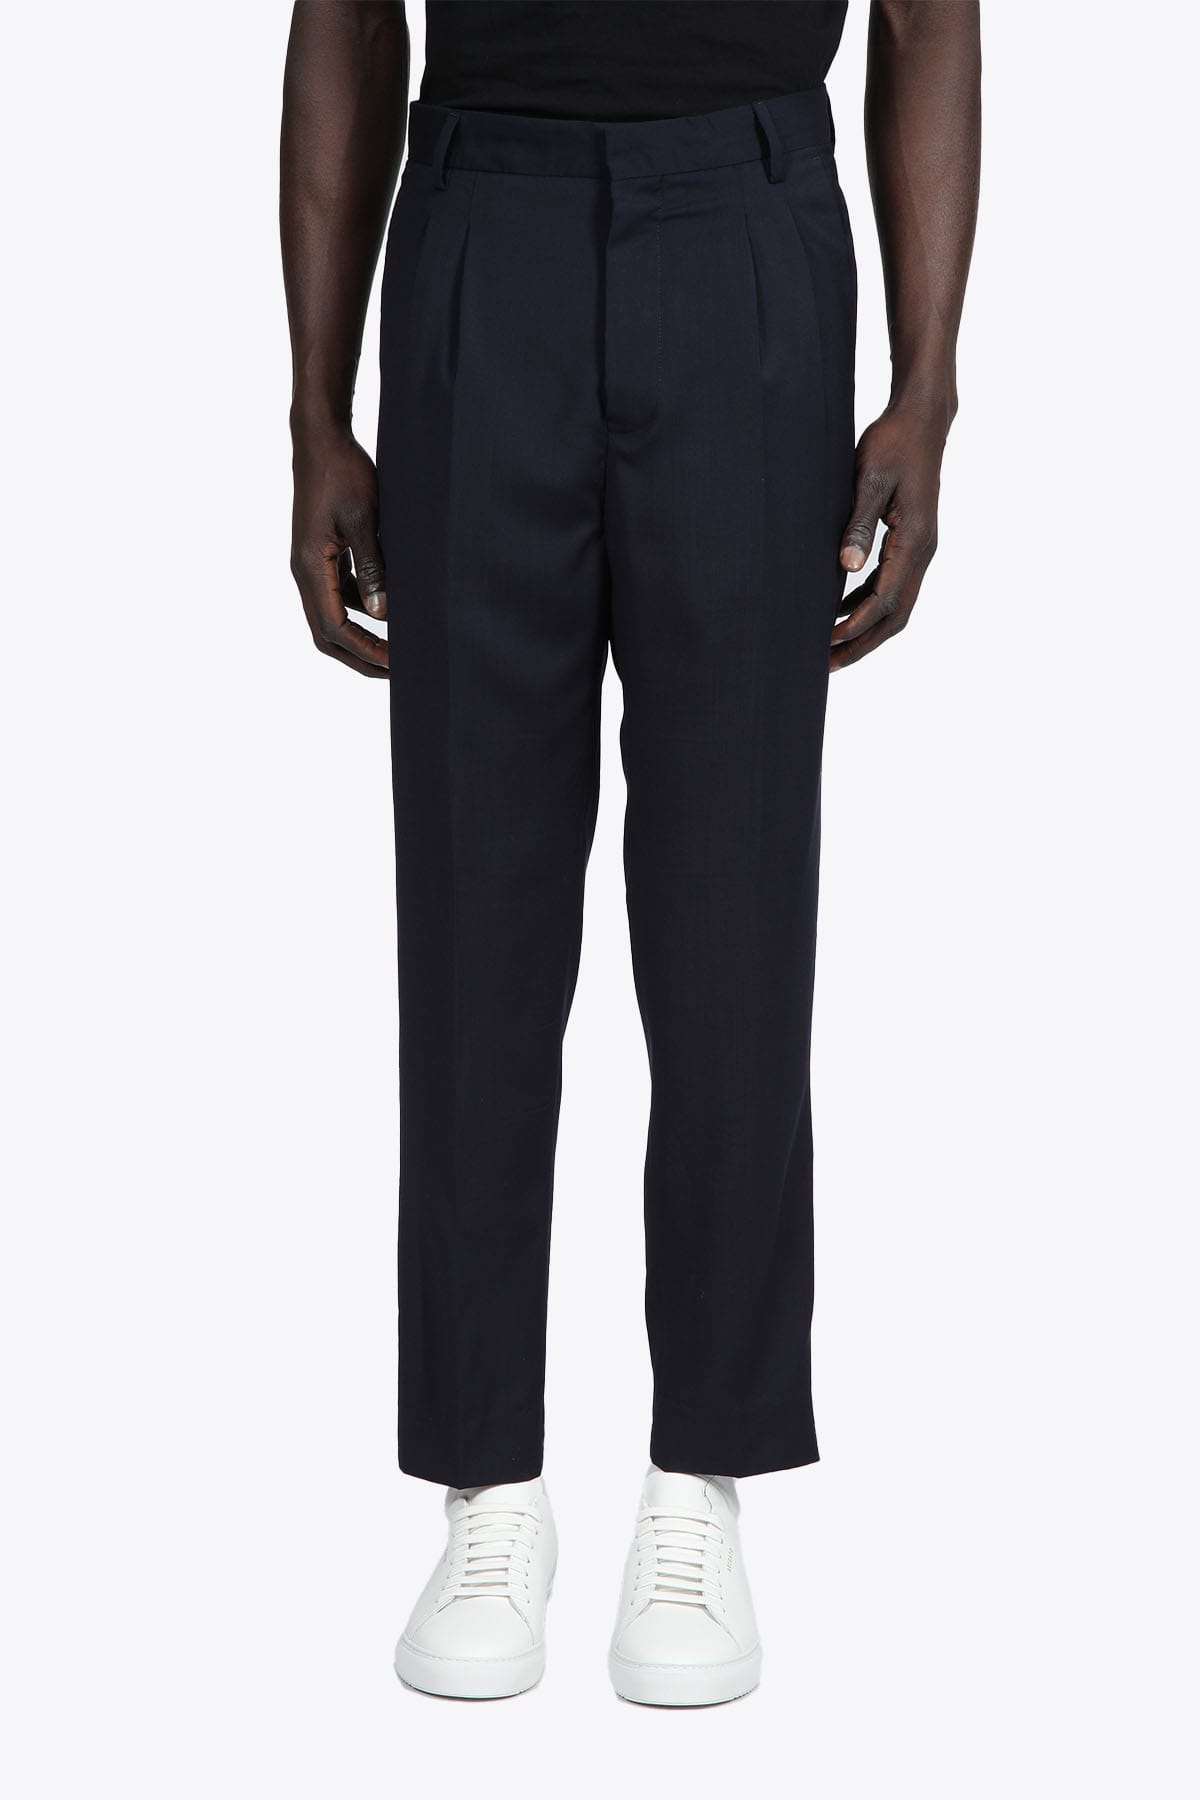 Mauro Grifoni Pantalone Doppia Pince Blue tailored pant with double pleats